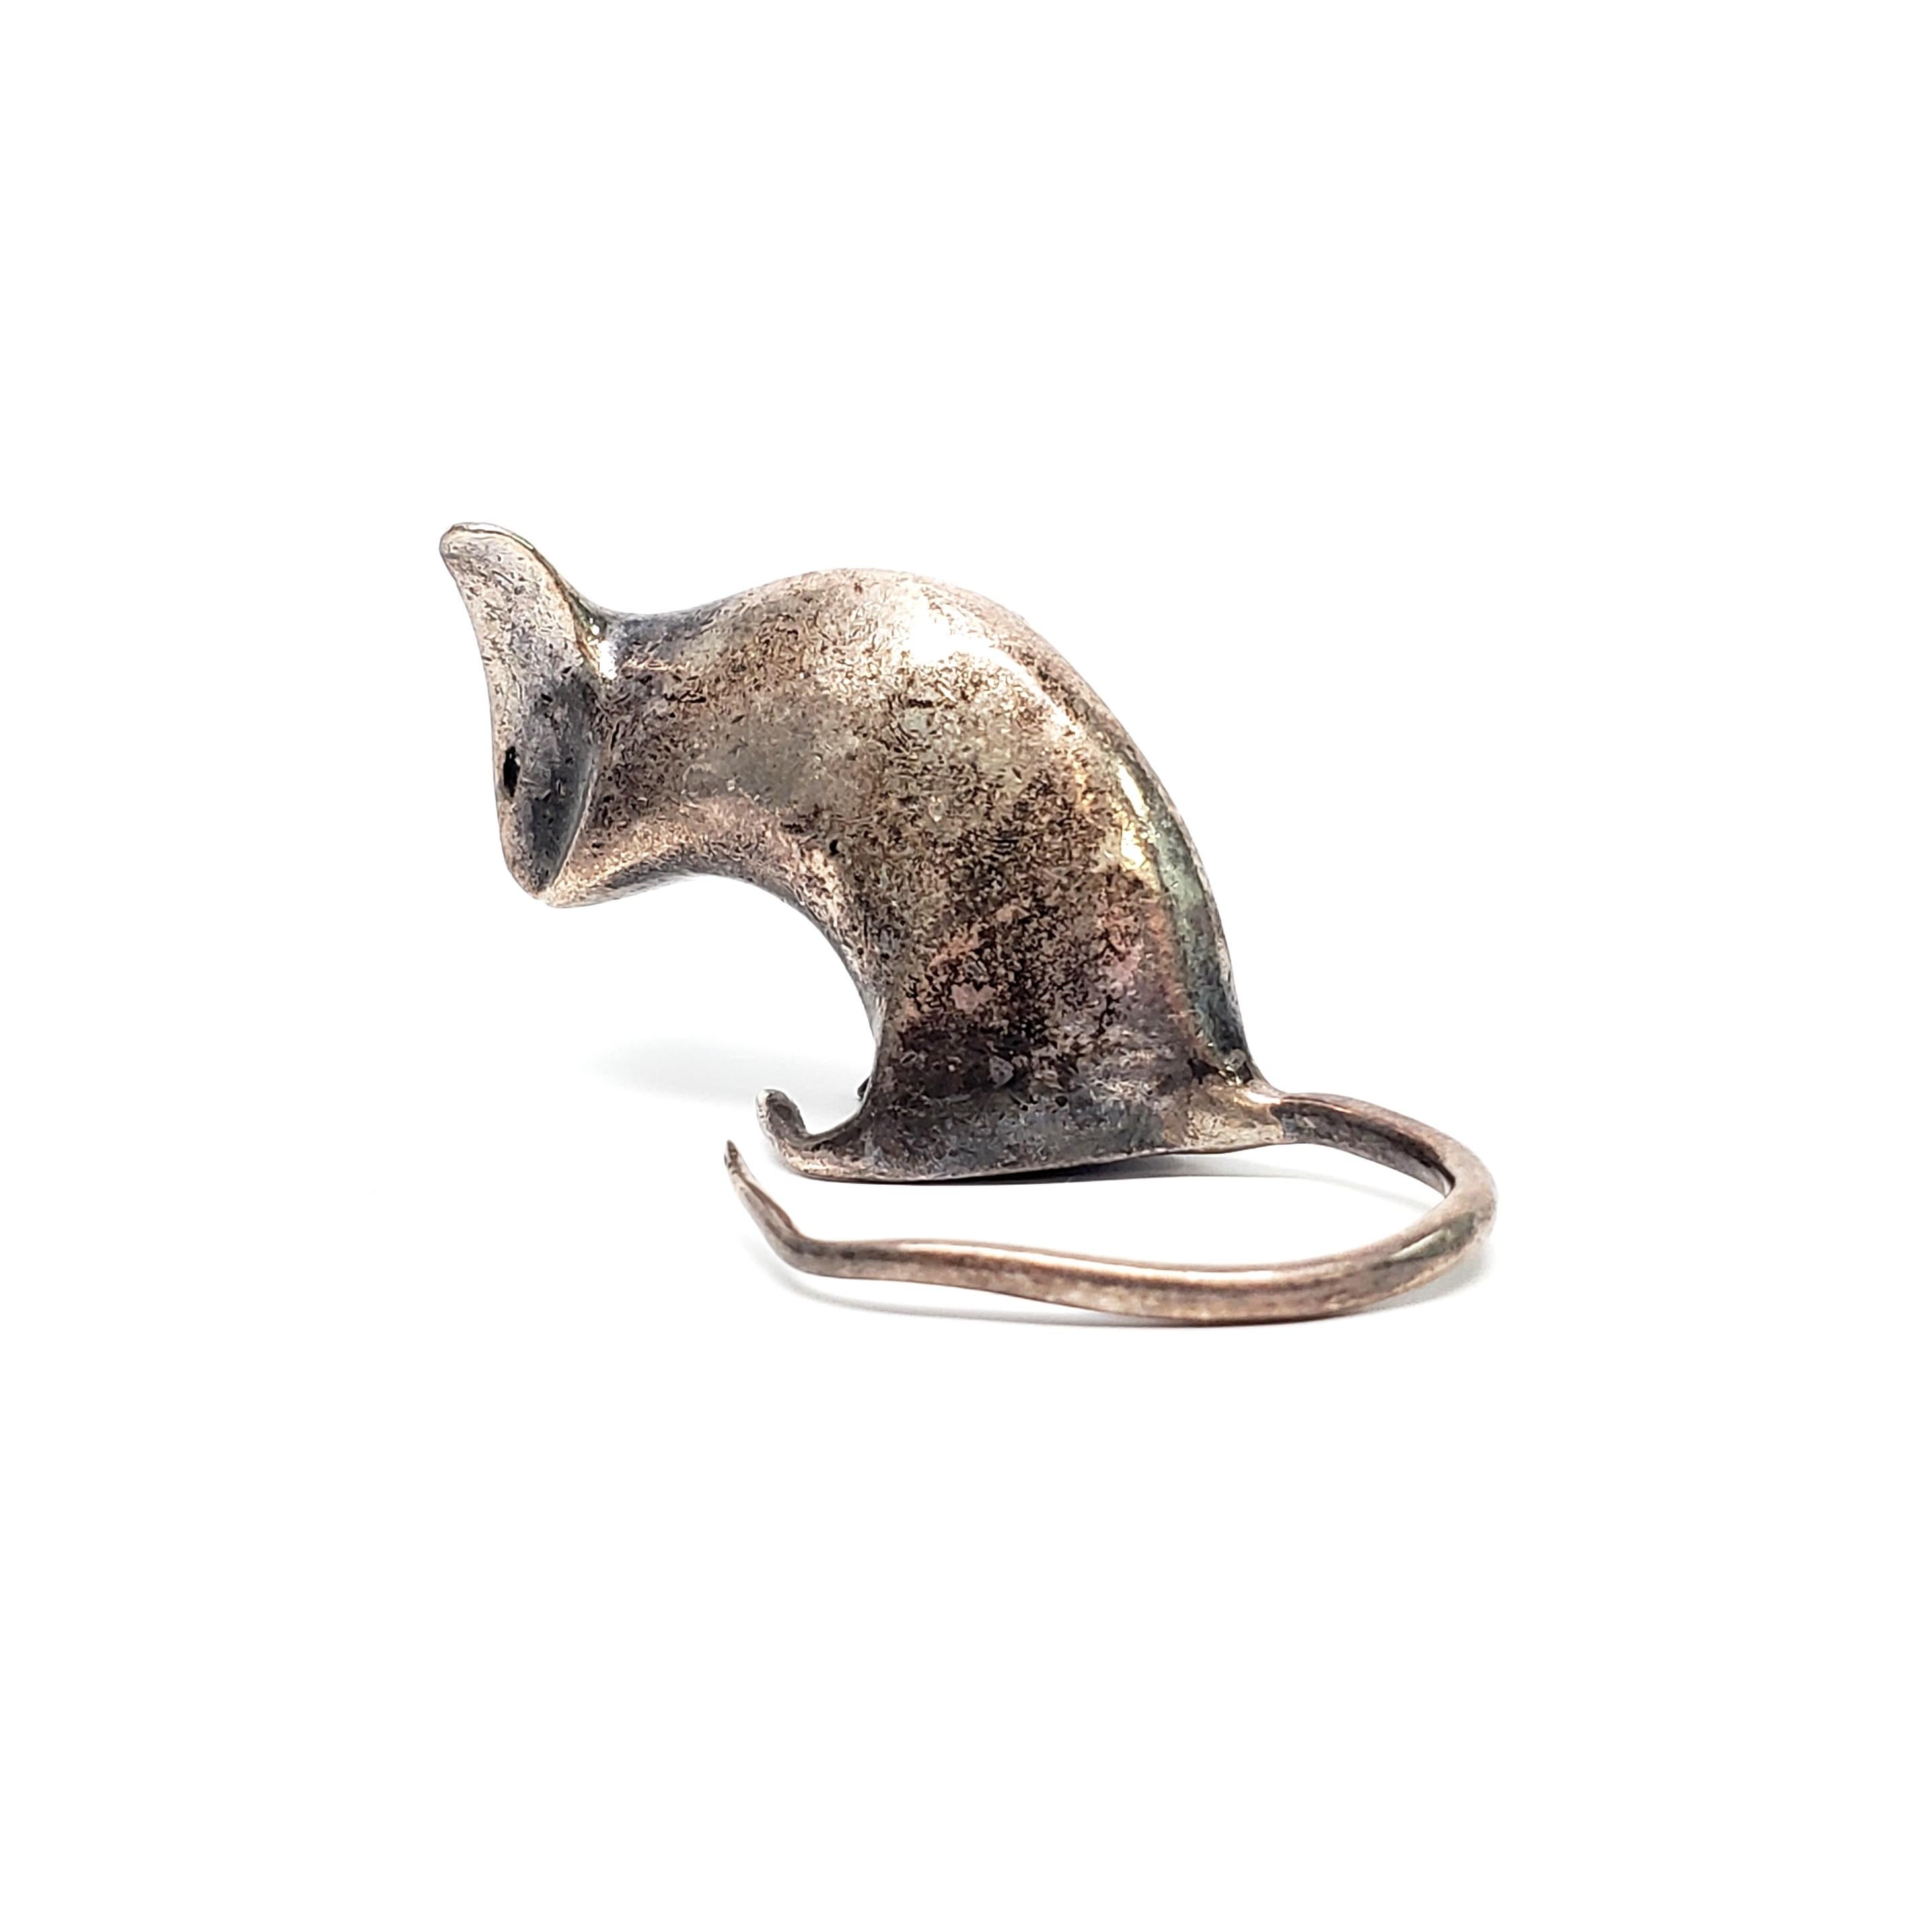 Vintage Tiffany & Co. sterling silver mouse figurine or paperweight.

This paperweight was featured in Tiffany's Blue Book in 1973. Features a mouse that appears to be eating our of its hands with its tail curled around.

Measures 1